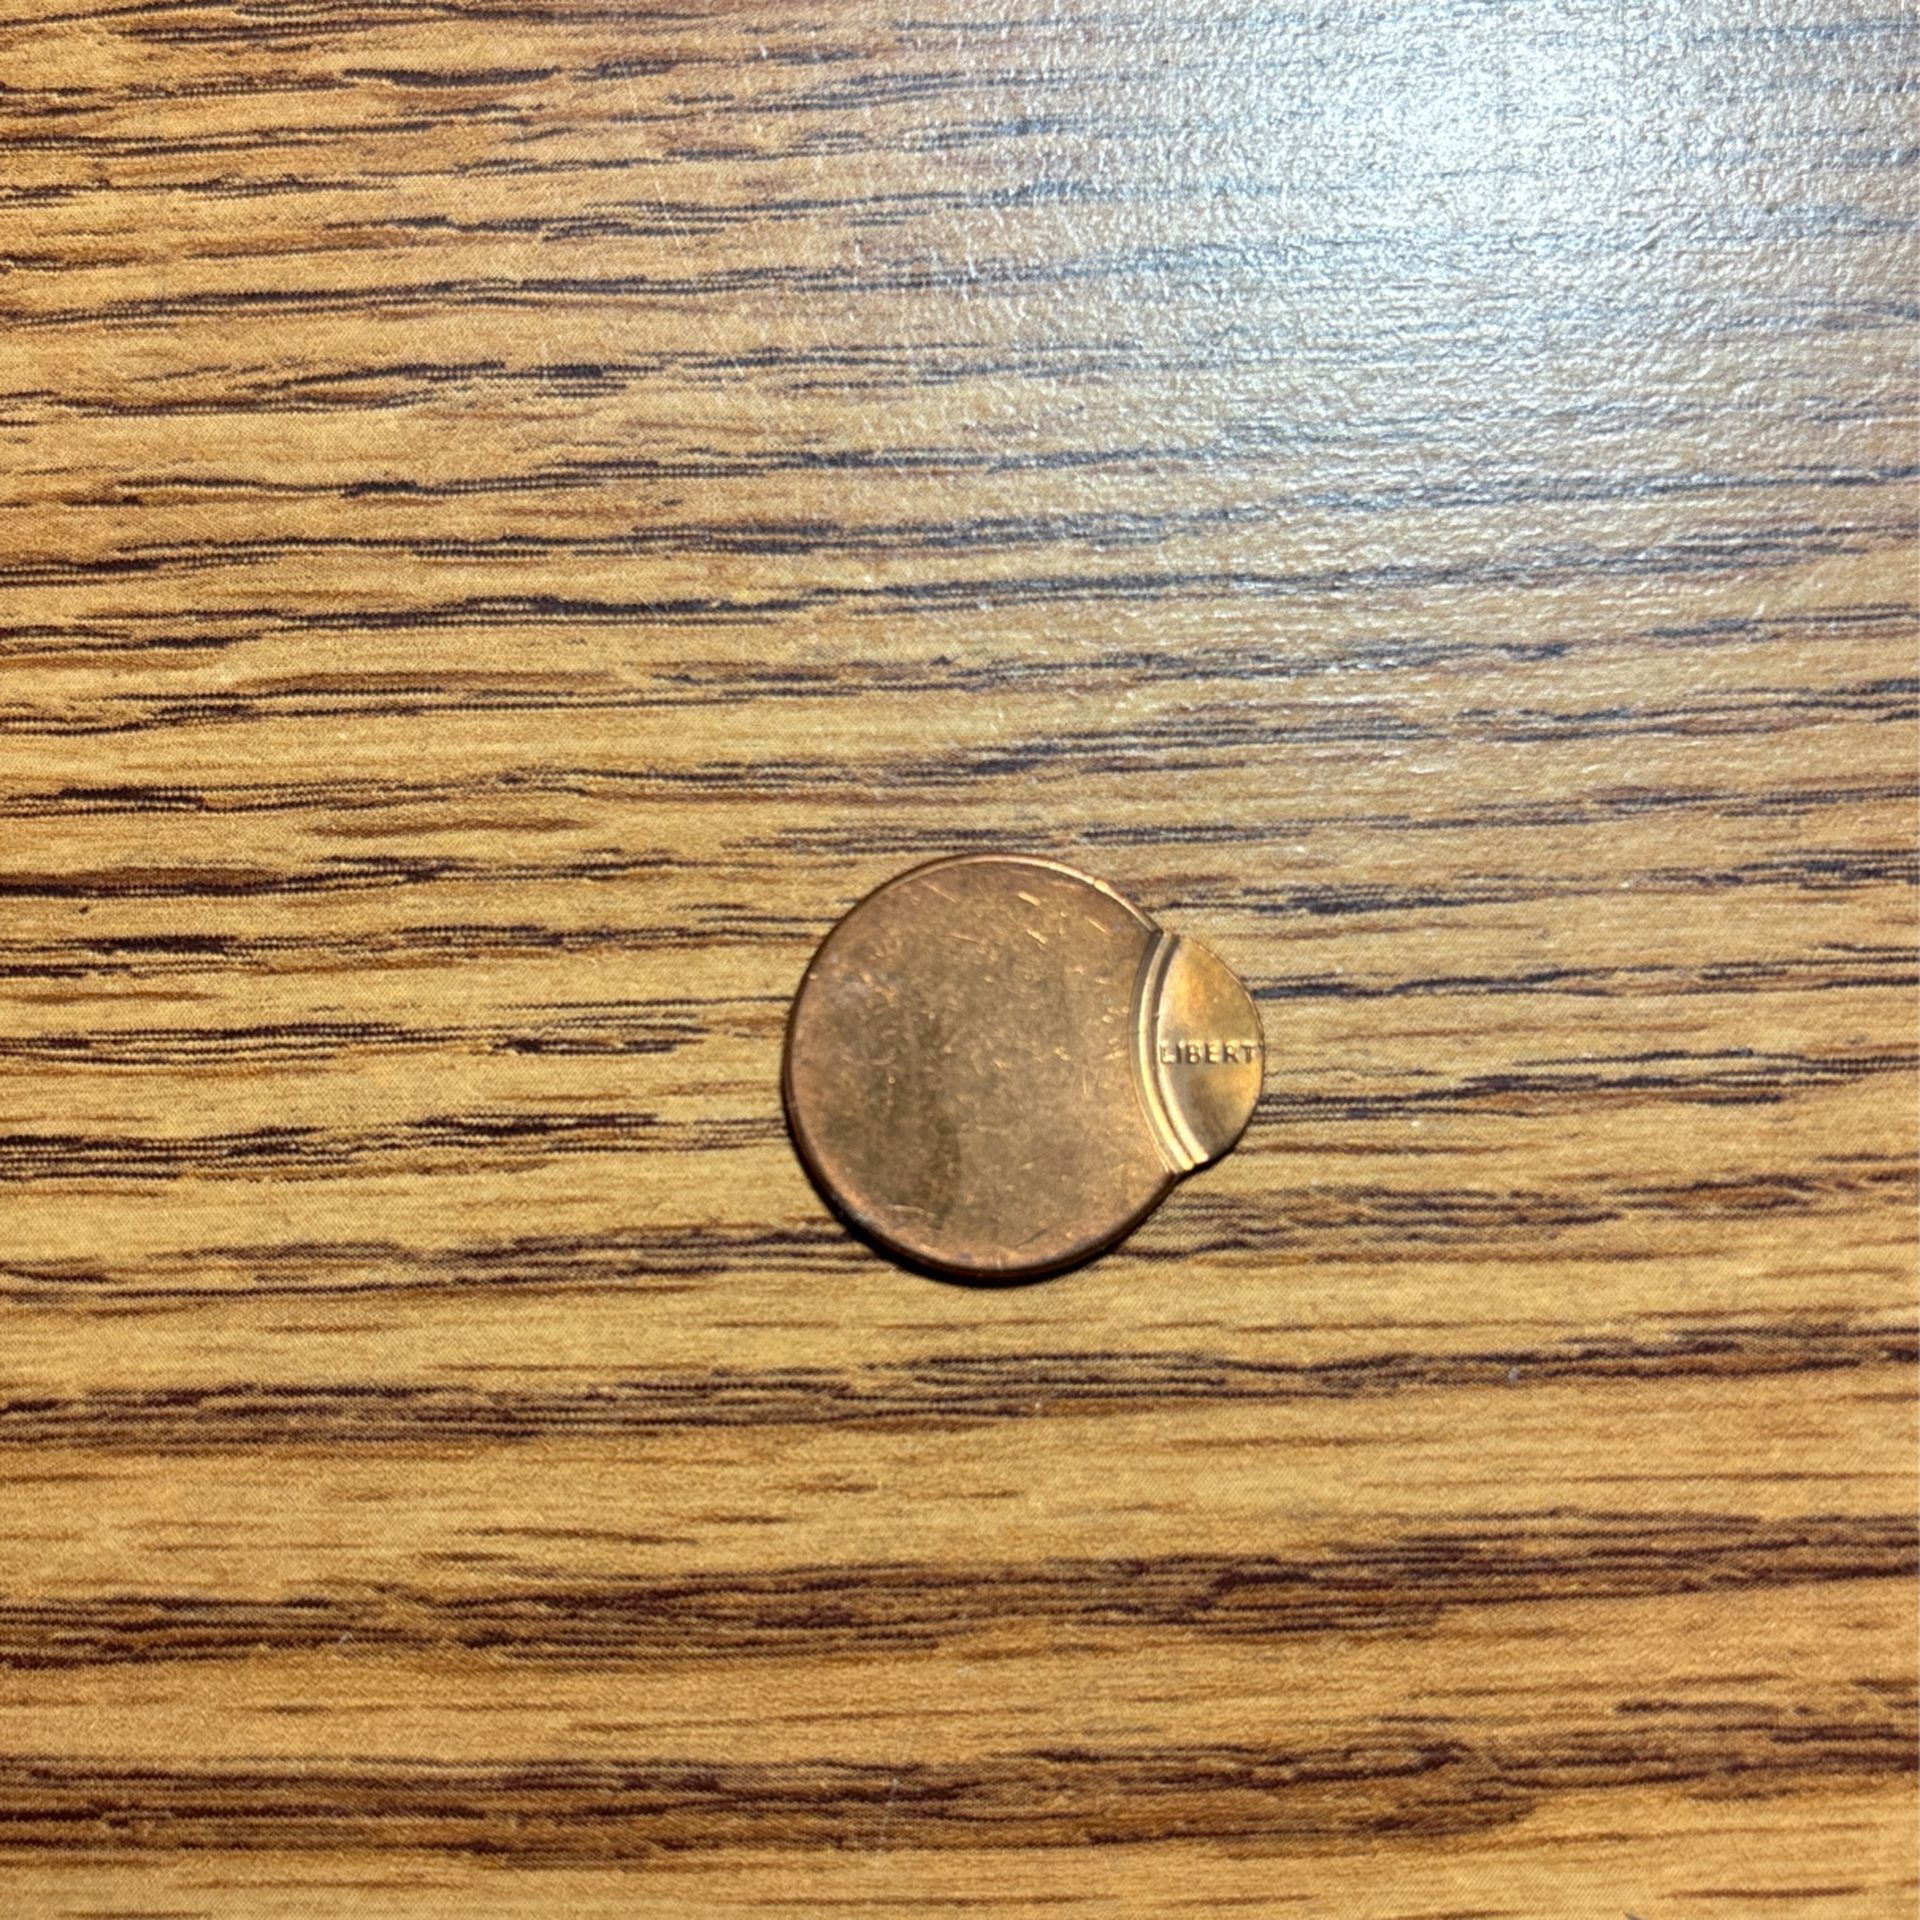 “REDUCED” Off- Center 85% Lincoln Penny Uncirculated 